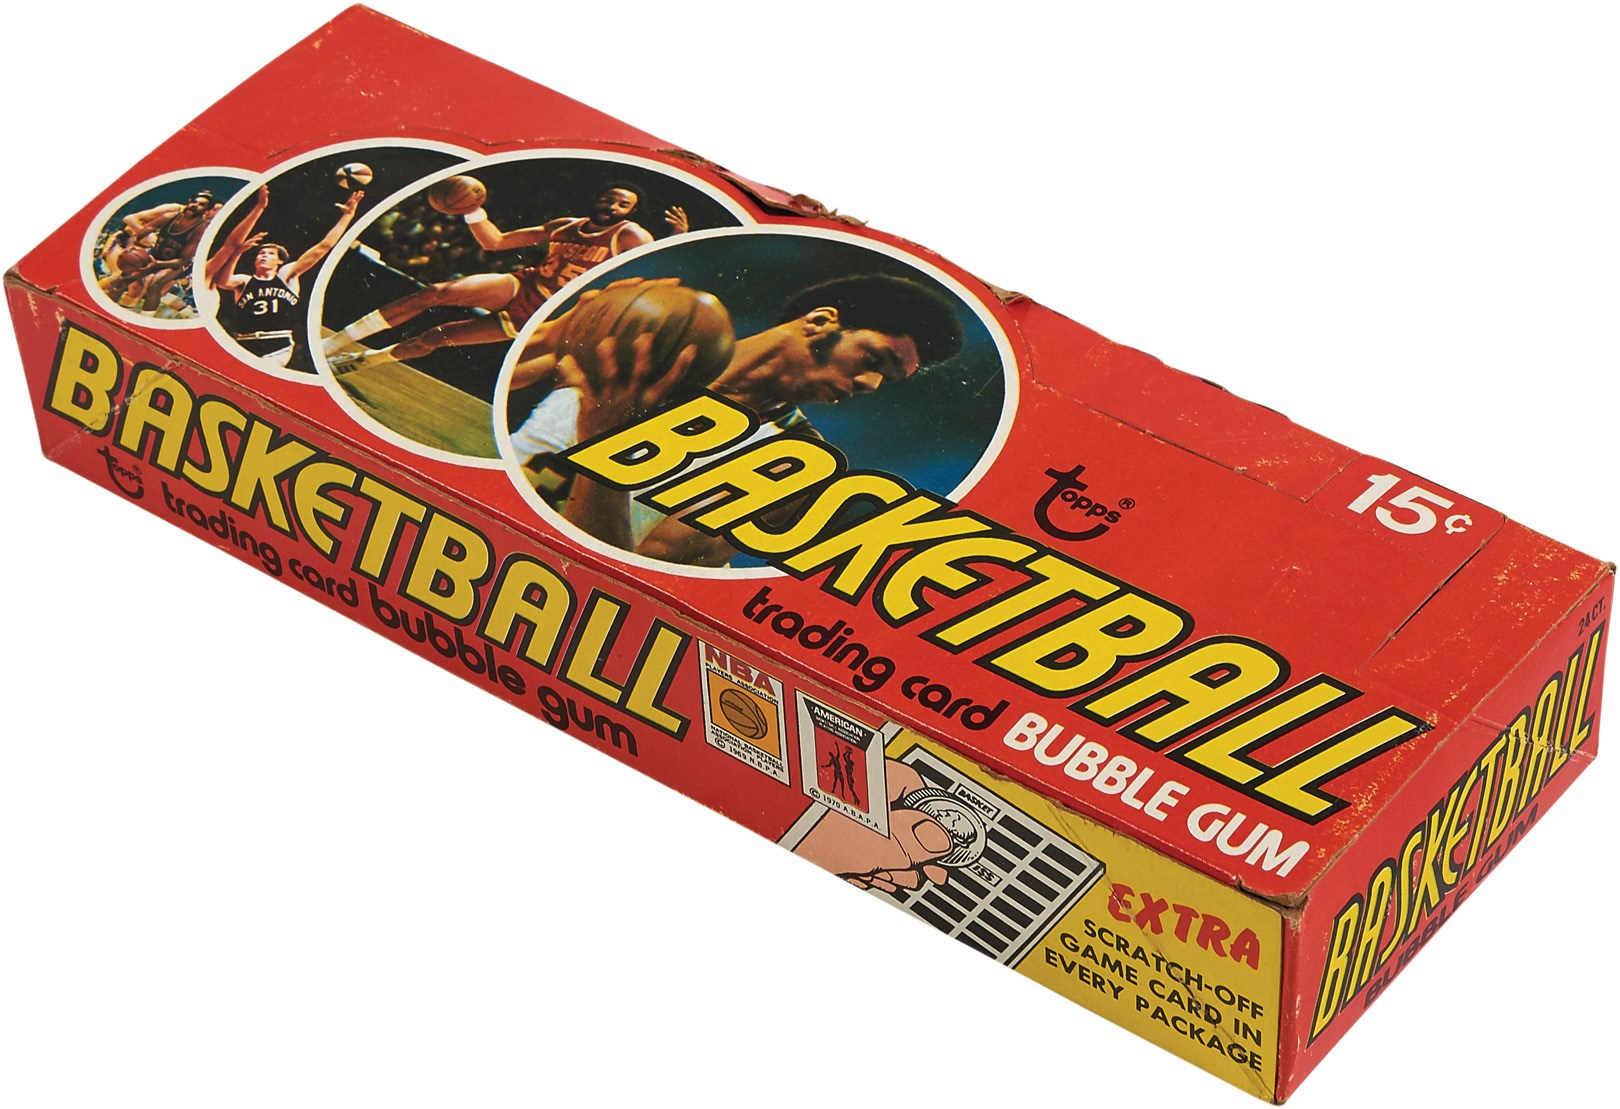 1974 Topps Basketball Near Complete Wax Box with 22 Unopened Packs